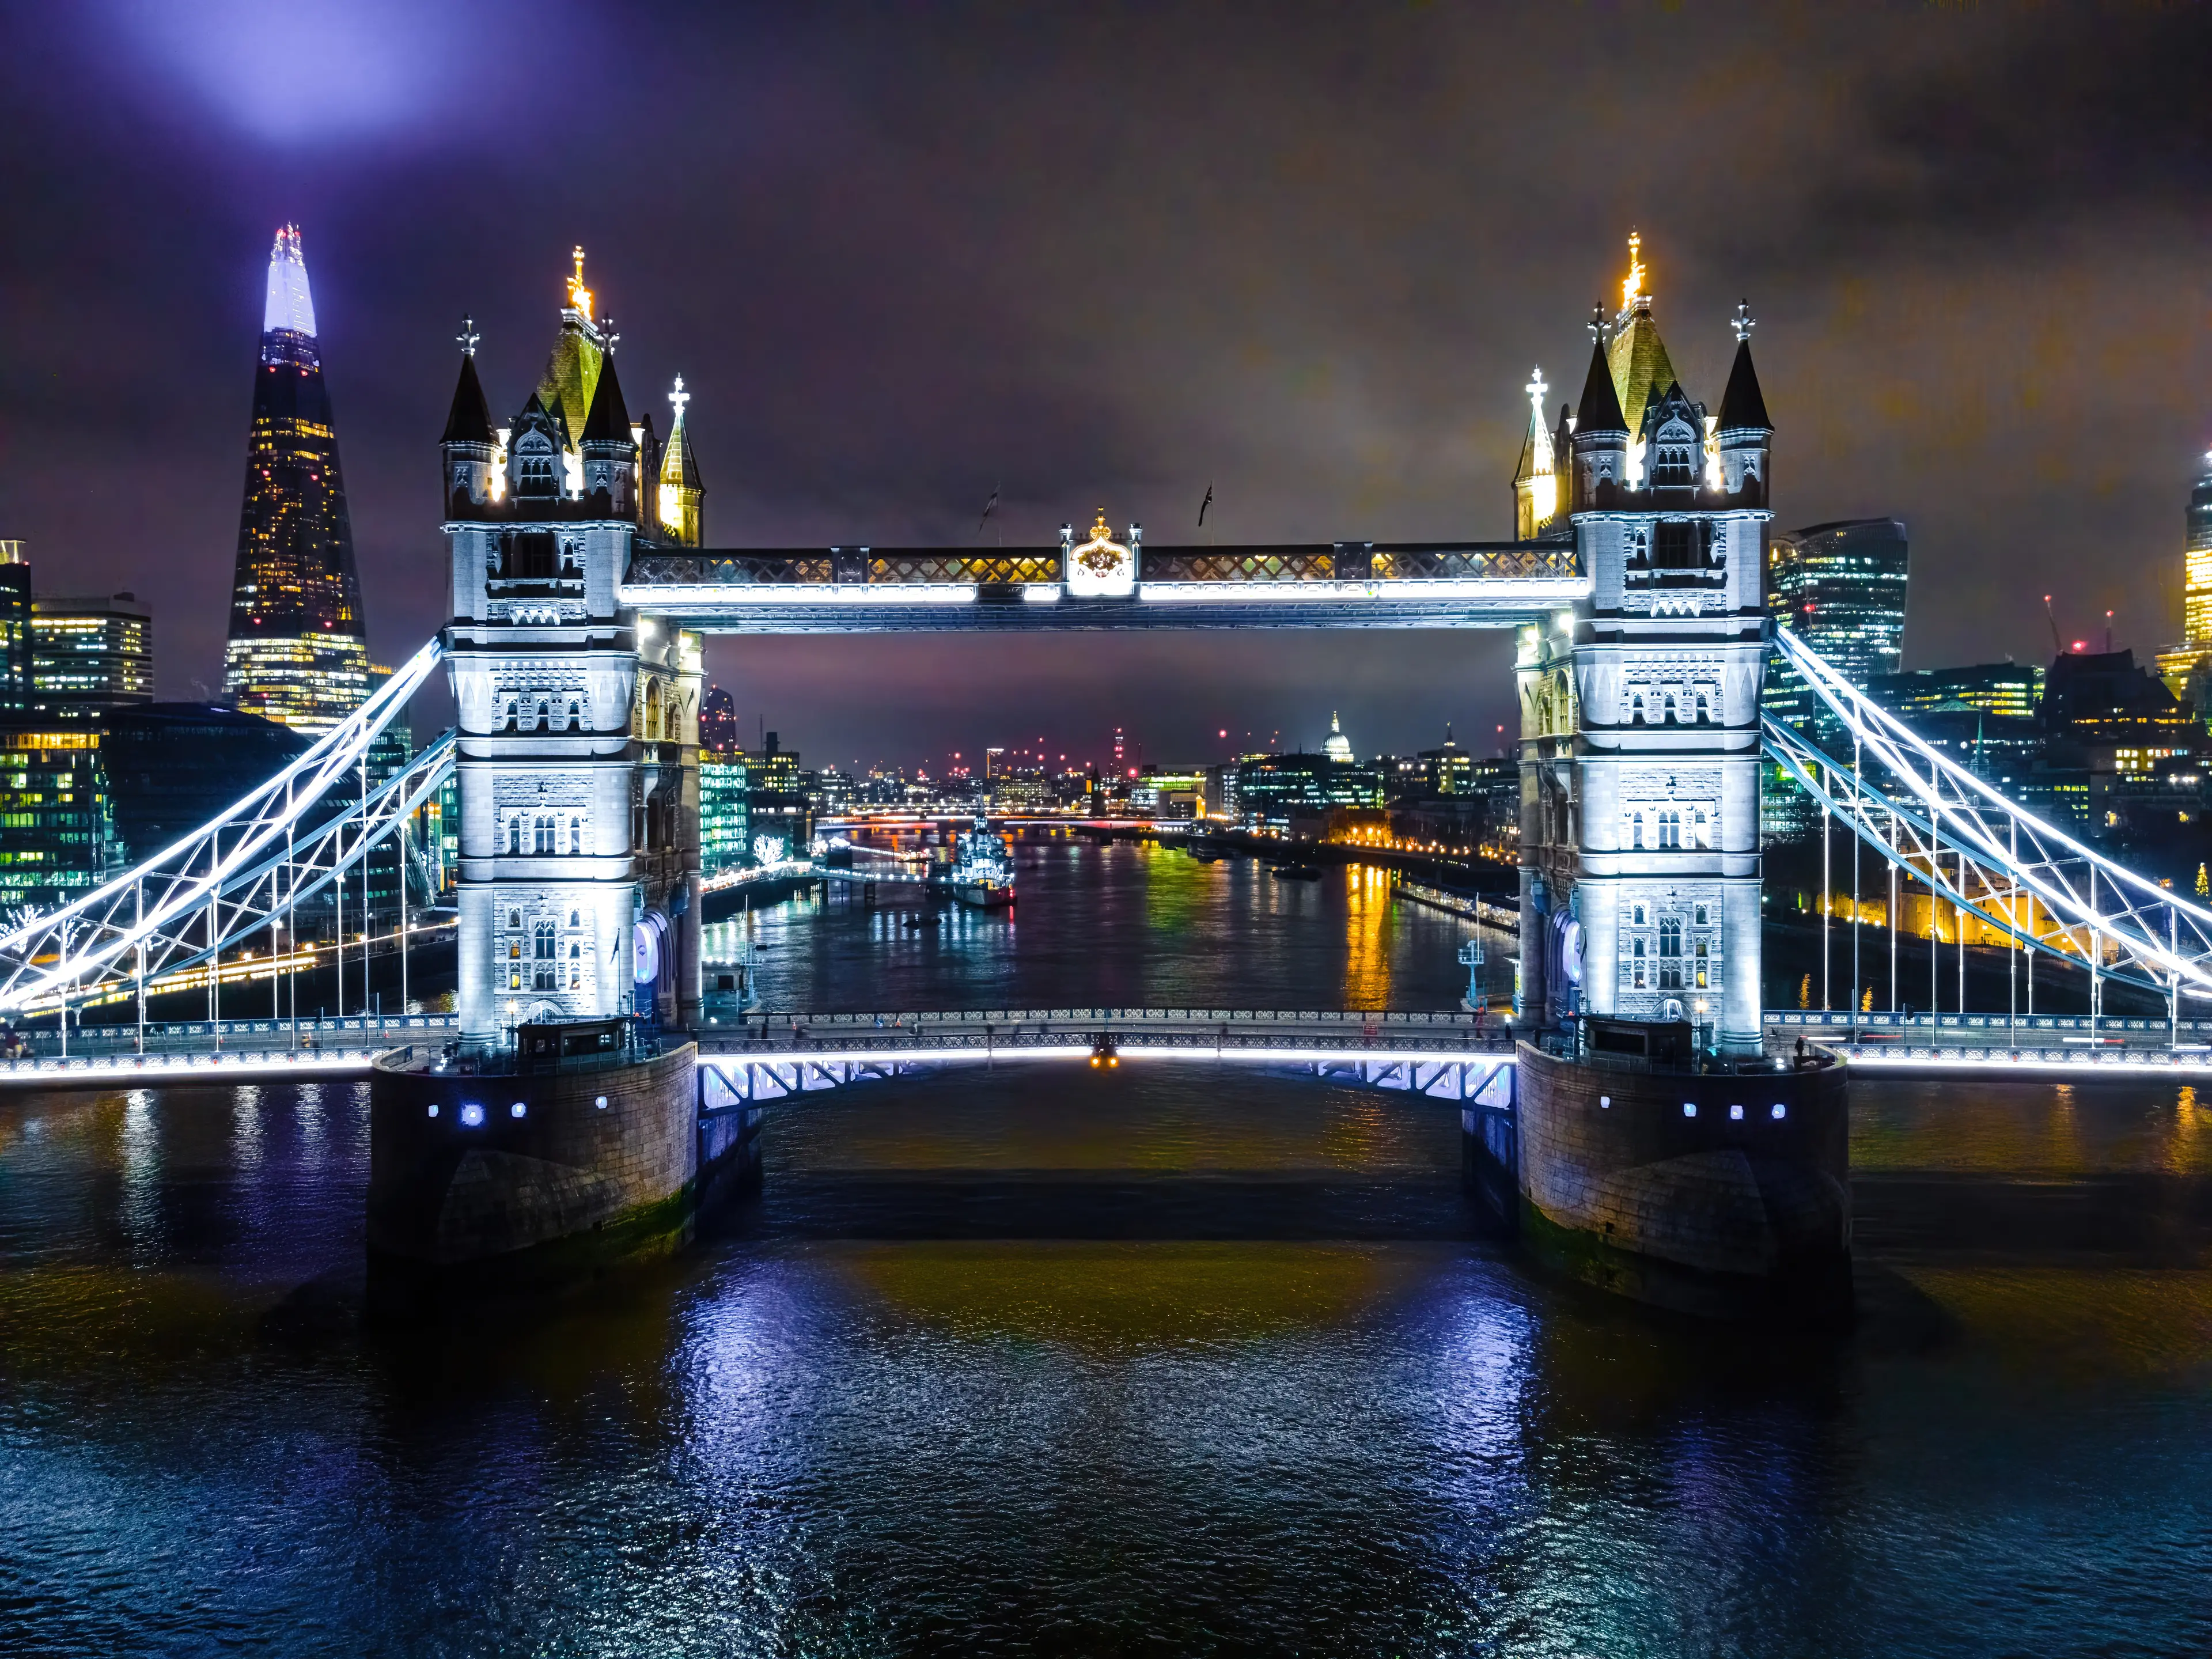 5-Day Romantic Christmas Getaway Itinerary in London, England